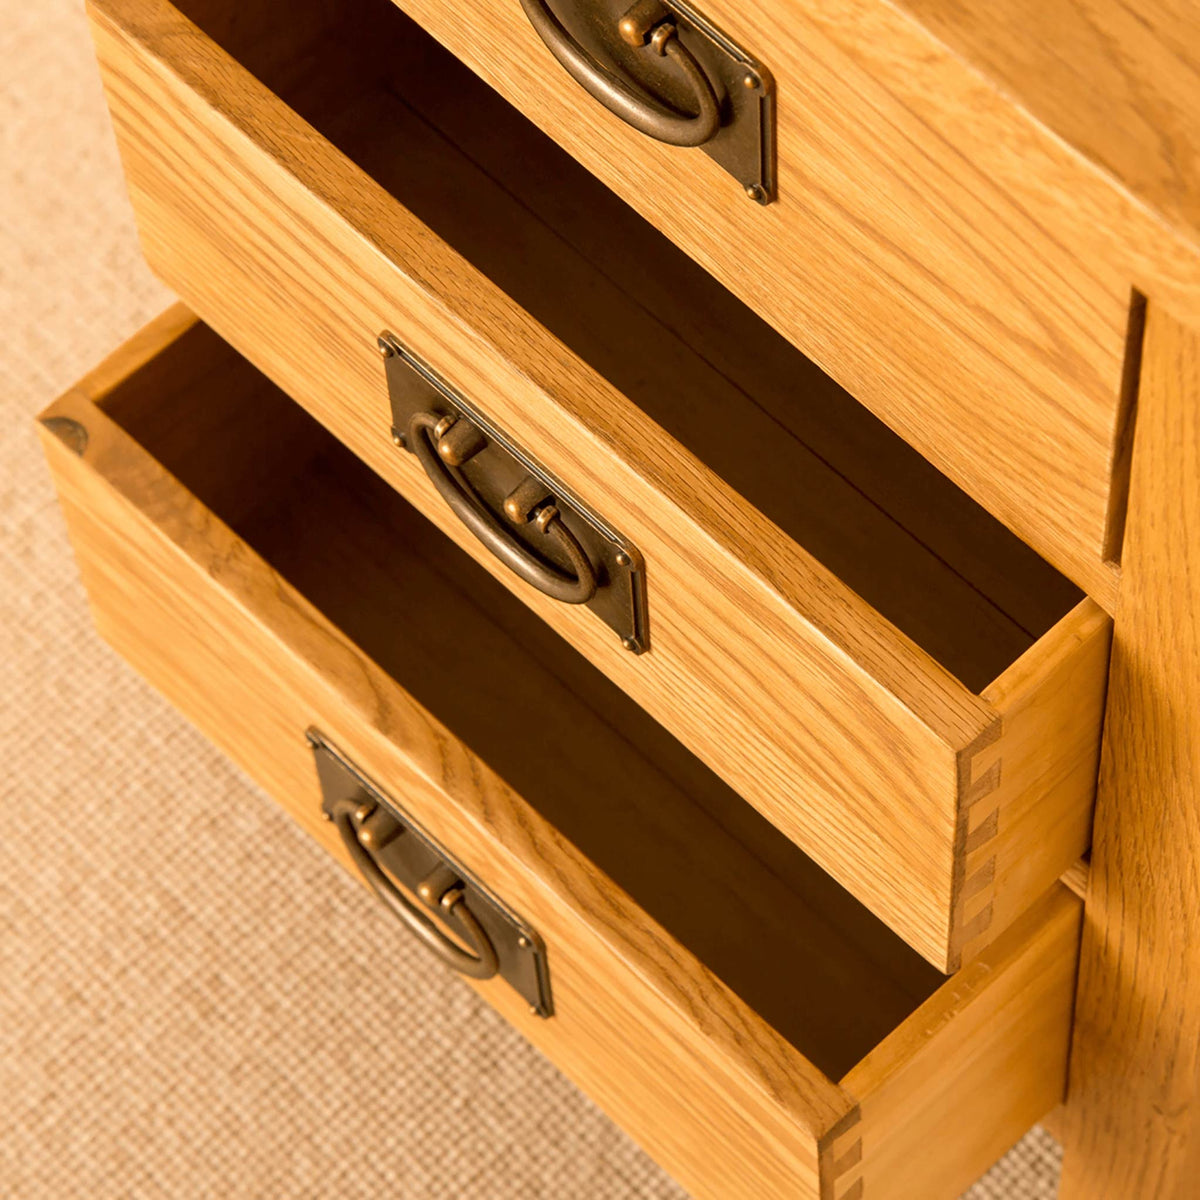 Lanner Oak Bedside Table top view of drawers